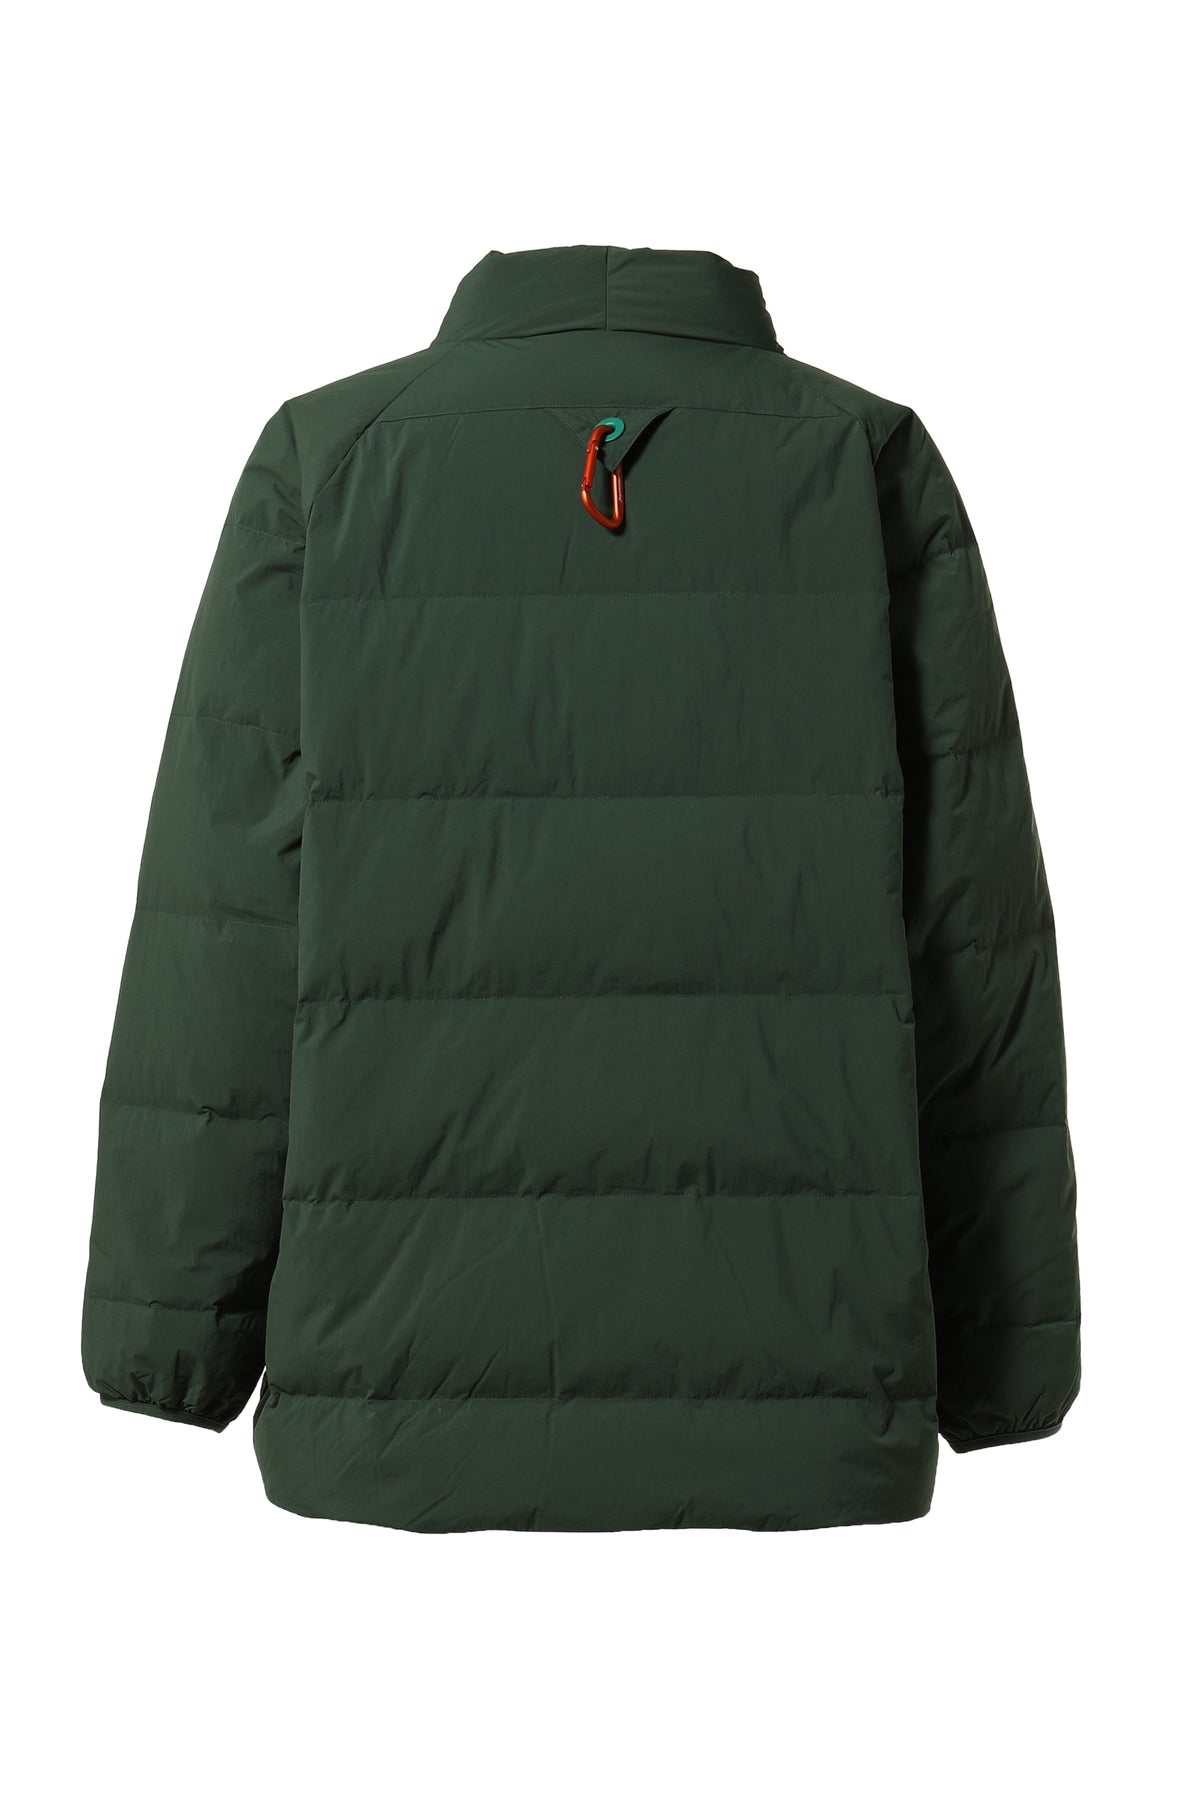 White Mountaineering × TAION WM×TAION DOWN JACKET / GRN